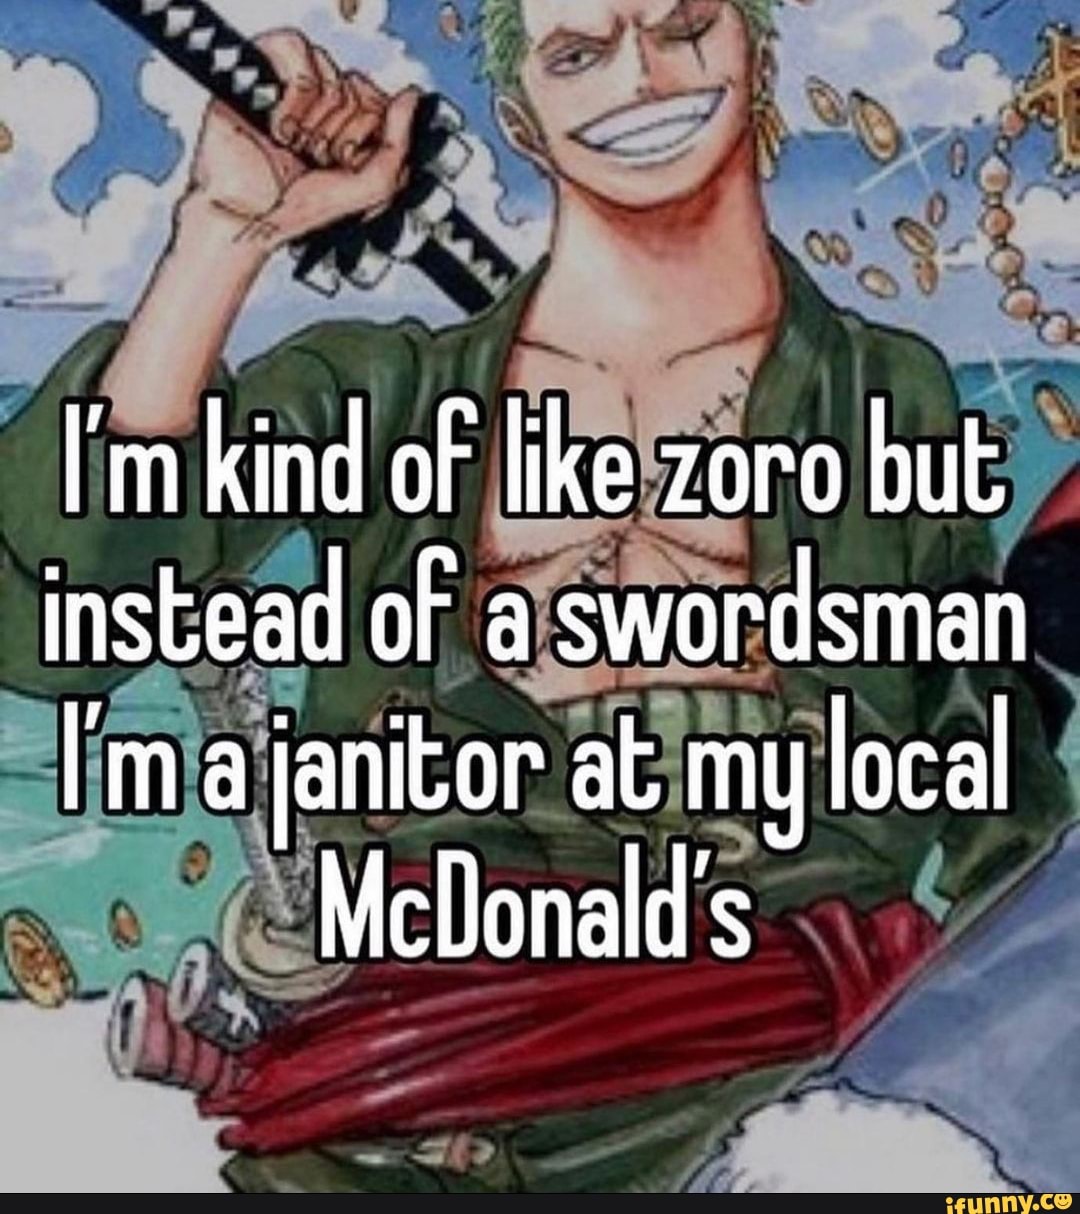 My boy Zoro didn't come here to play little games. Enma is a real badass  katana! - 9GAG